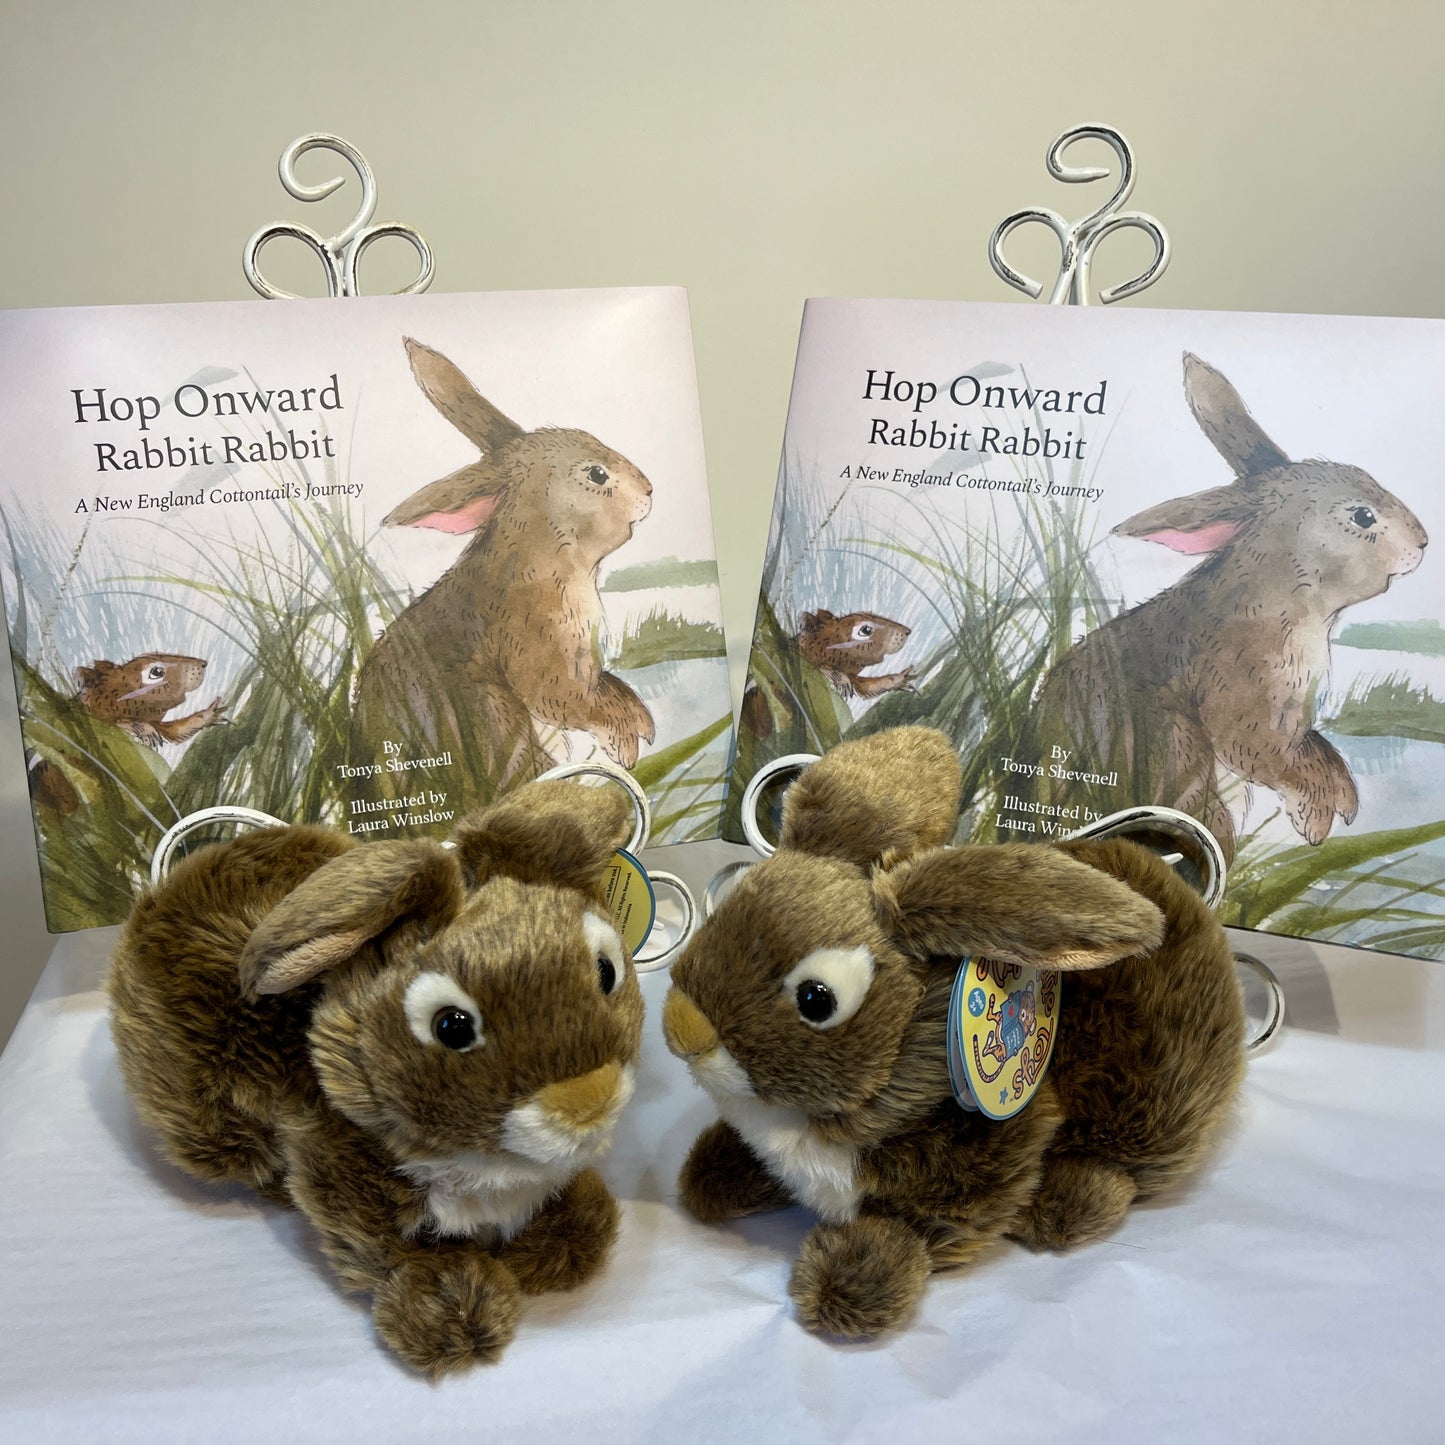 The book and bunny (cottontail) bundle! Hop Onward Rabbit Rabbit: A New England Cottontail's Journey